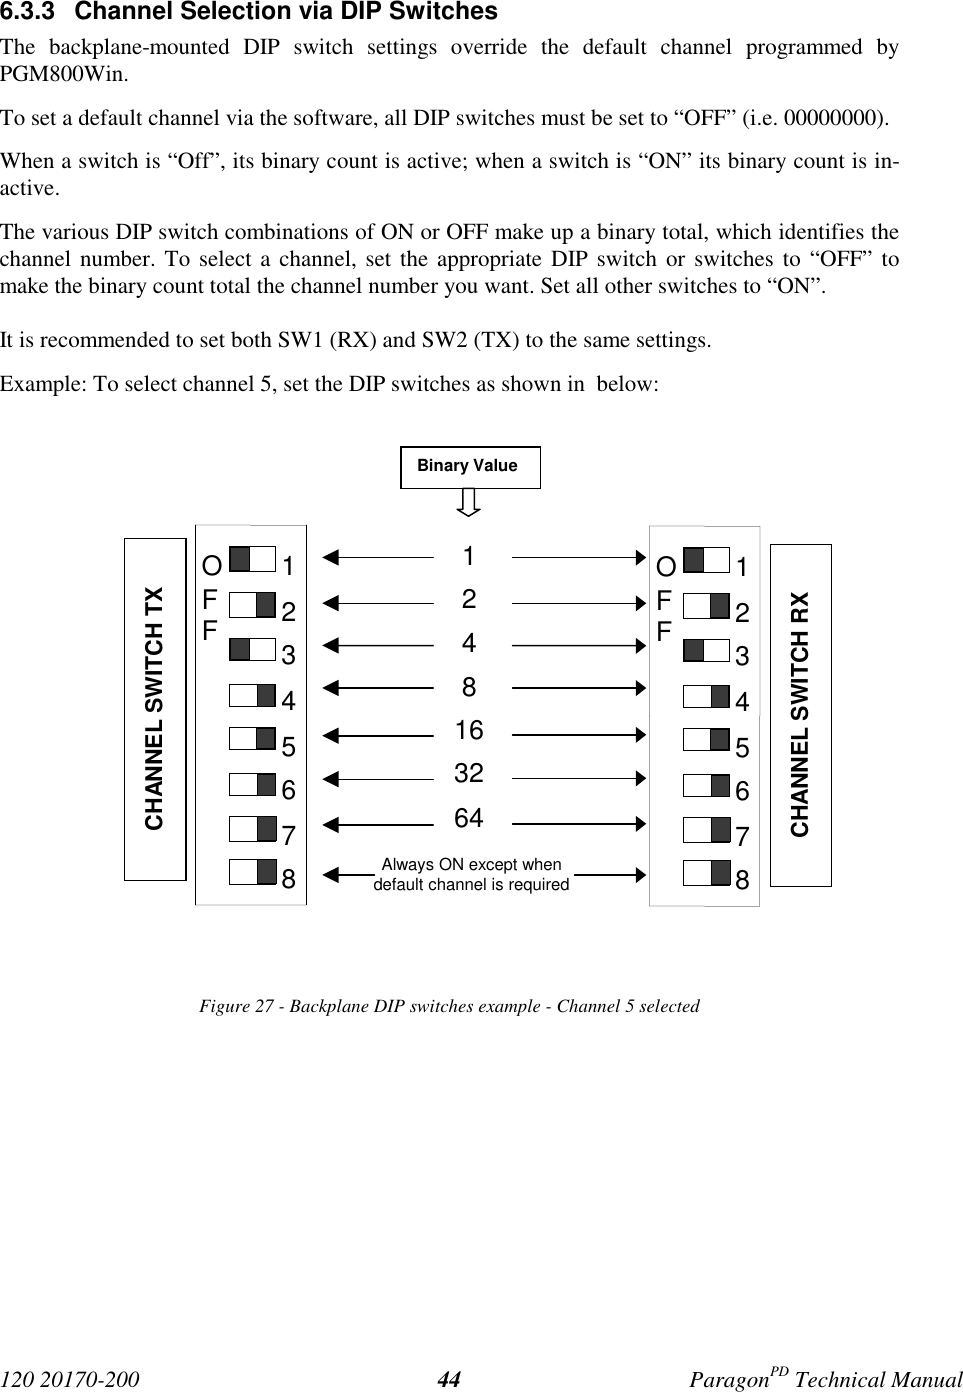 120 20170-200 ParagonPD Technical Manual446.3.3  Channel Selection via DIP SwitchesThe backplane-mounted DIP switch settings override the default channel programmed byPGM800Win.To set a default channel via the software, all DIP switches must be set to “OFF” (i.e. 00000000).When a switch is “Off”, its binary count is active; when a switch is “ON” its binary count is in-active.The various DIP switch combinations of ON or OFF make up a binary total, which identifies thechannel number. To select a channel, set the appropriate DIP switch or switches to “OFF” tomake the binary count total the channel number you want. Set all other switches to “ON”.It is recommended to set both SW1 (RX) and SW2 (TX) to the same settings.Example: To select channel 5, set the DIP switches as shown in  below:Figure 27 - Backplane DIP switches example - Channel 5 selectedBinary Value1248163264Always ON except whendefault channel is requiredCHANNEL SWITCH TXCHANNEL SWITCH RX12345678OFF12345678OFF